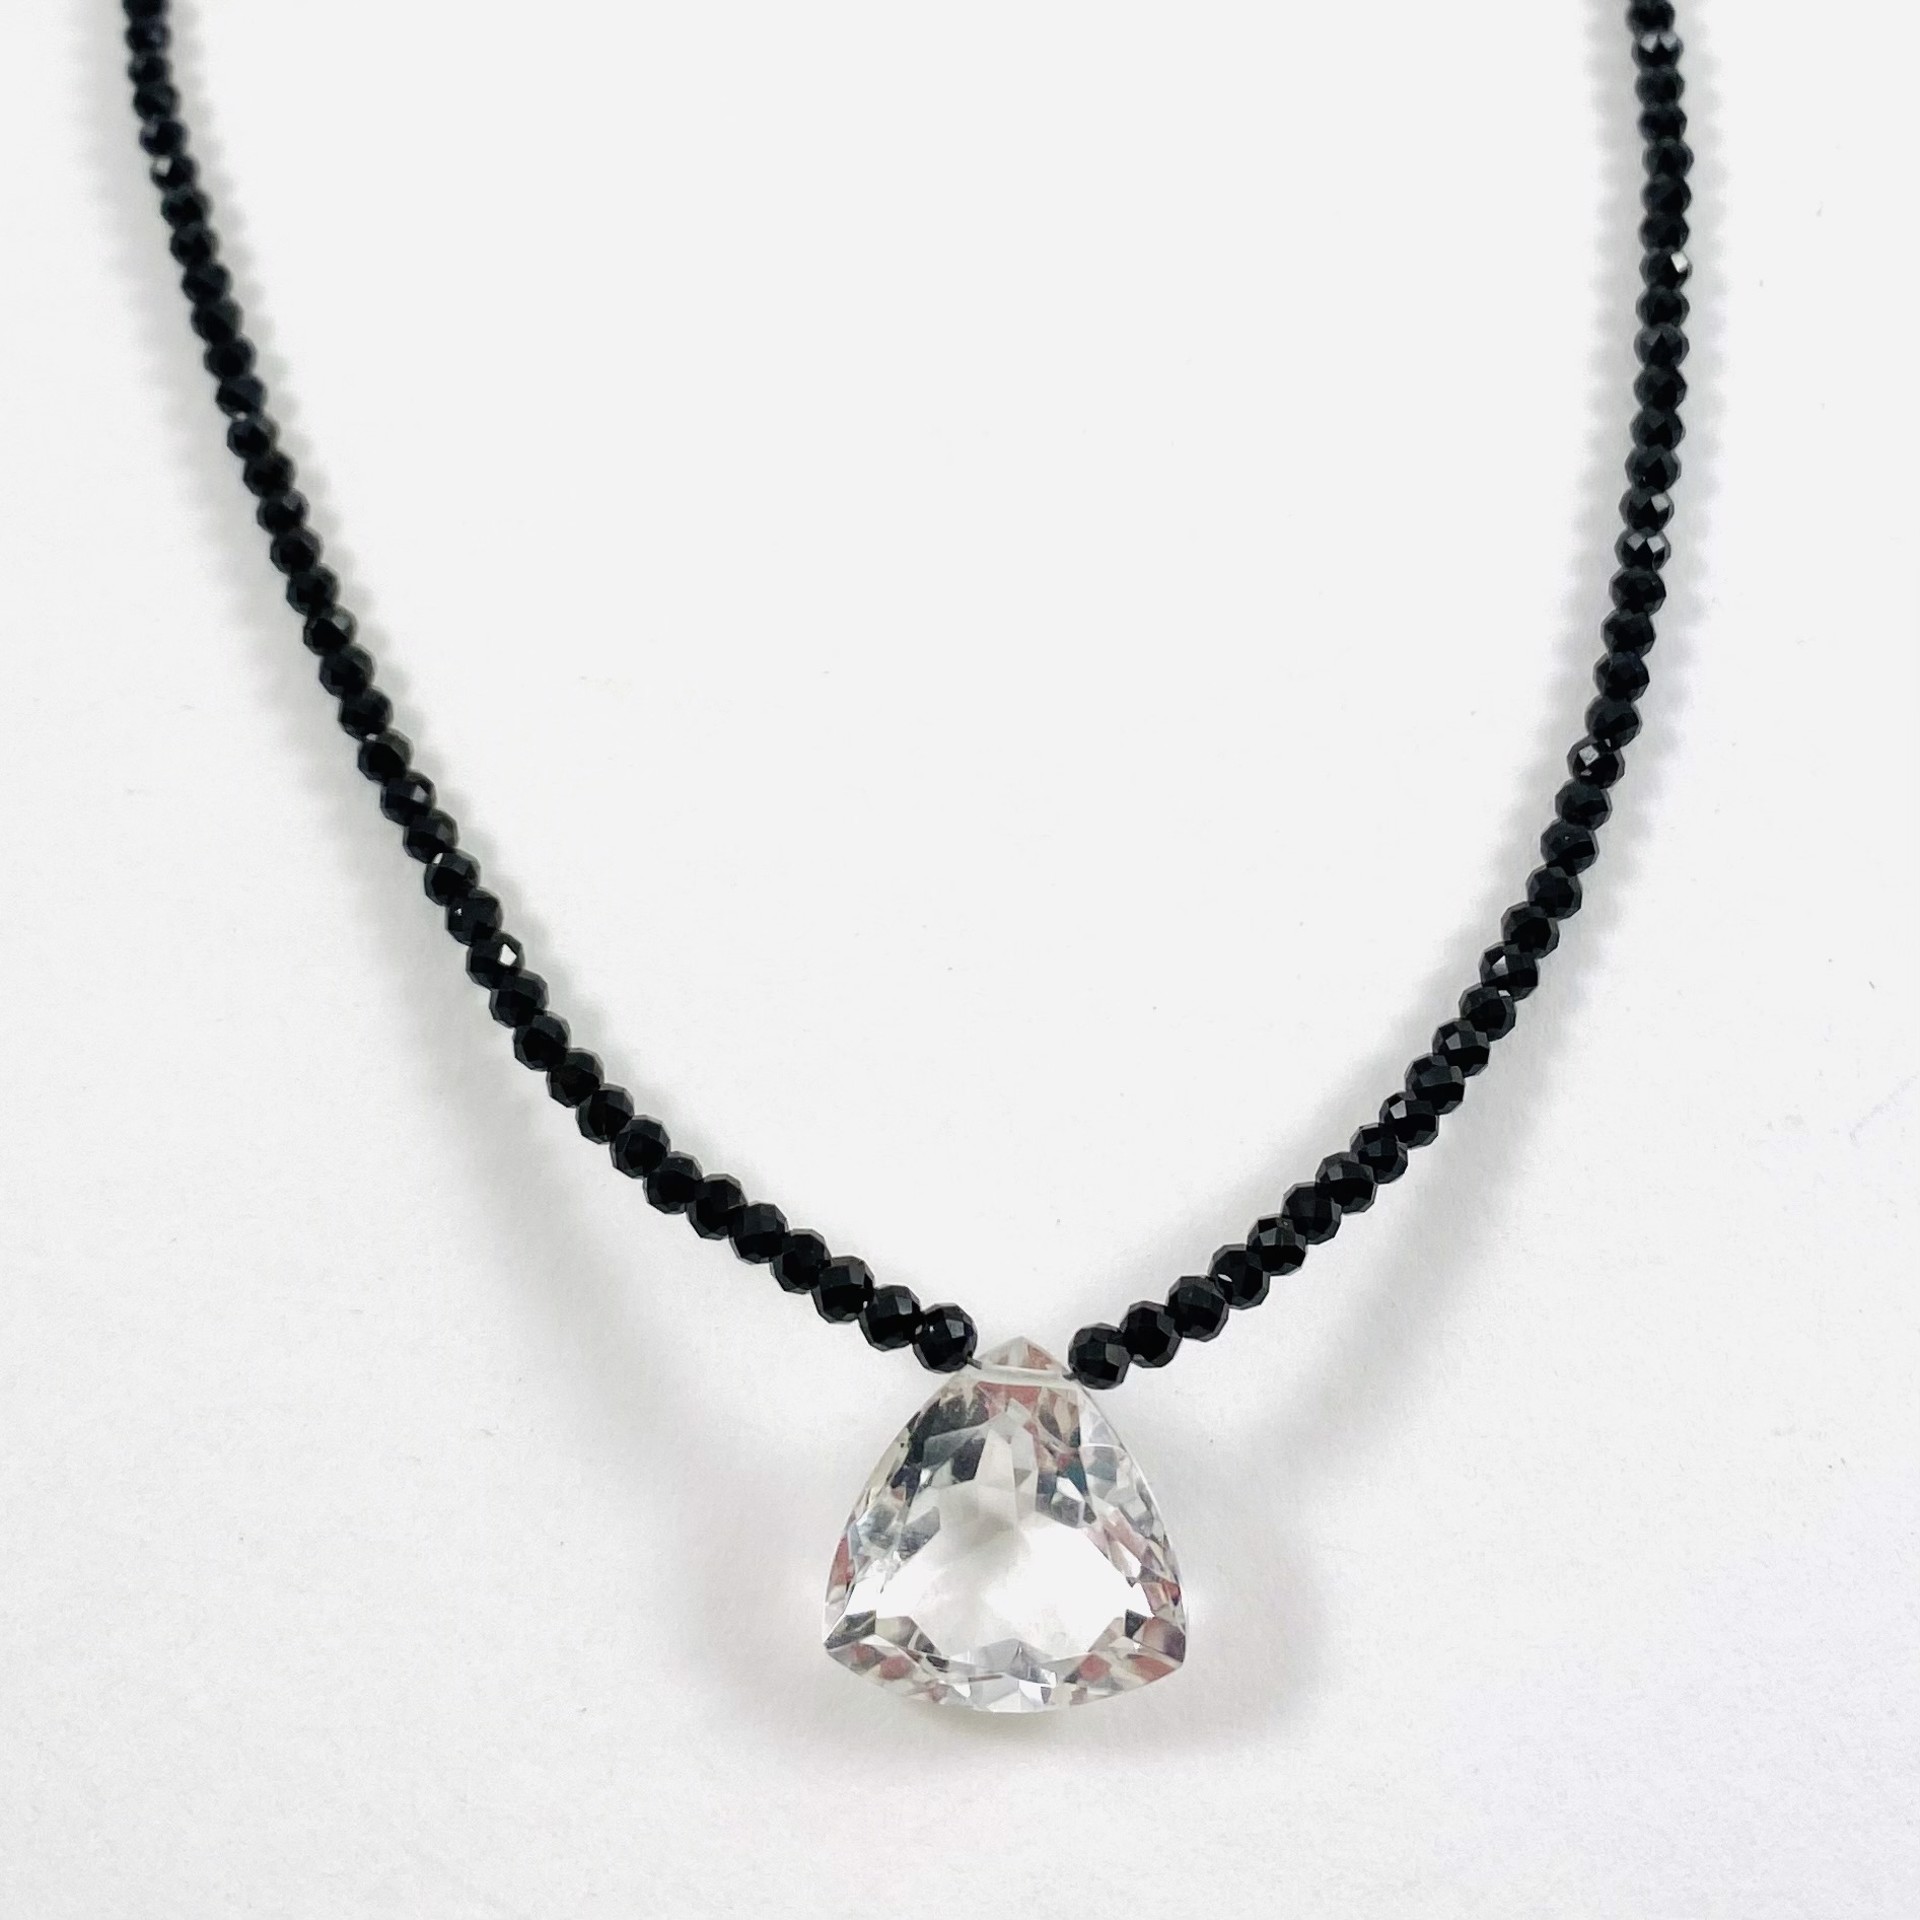 Tiny Black Spinel Faceted Clear Quartz Focal Necklace by Nance Trueworthy